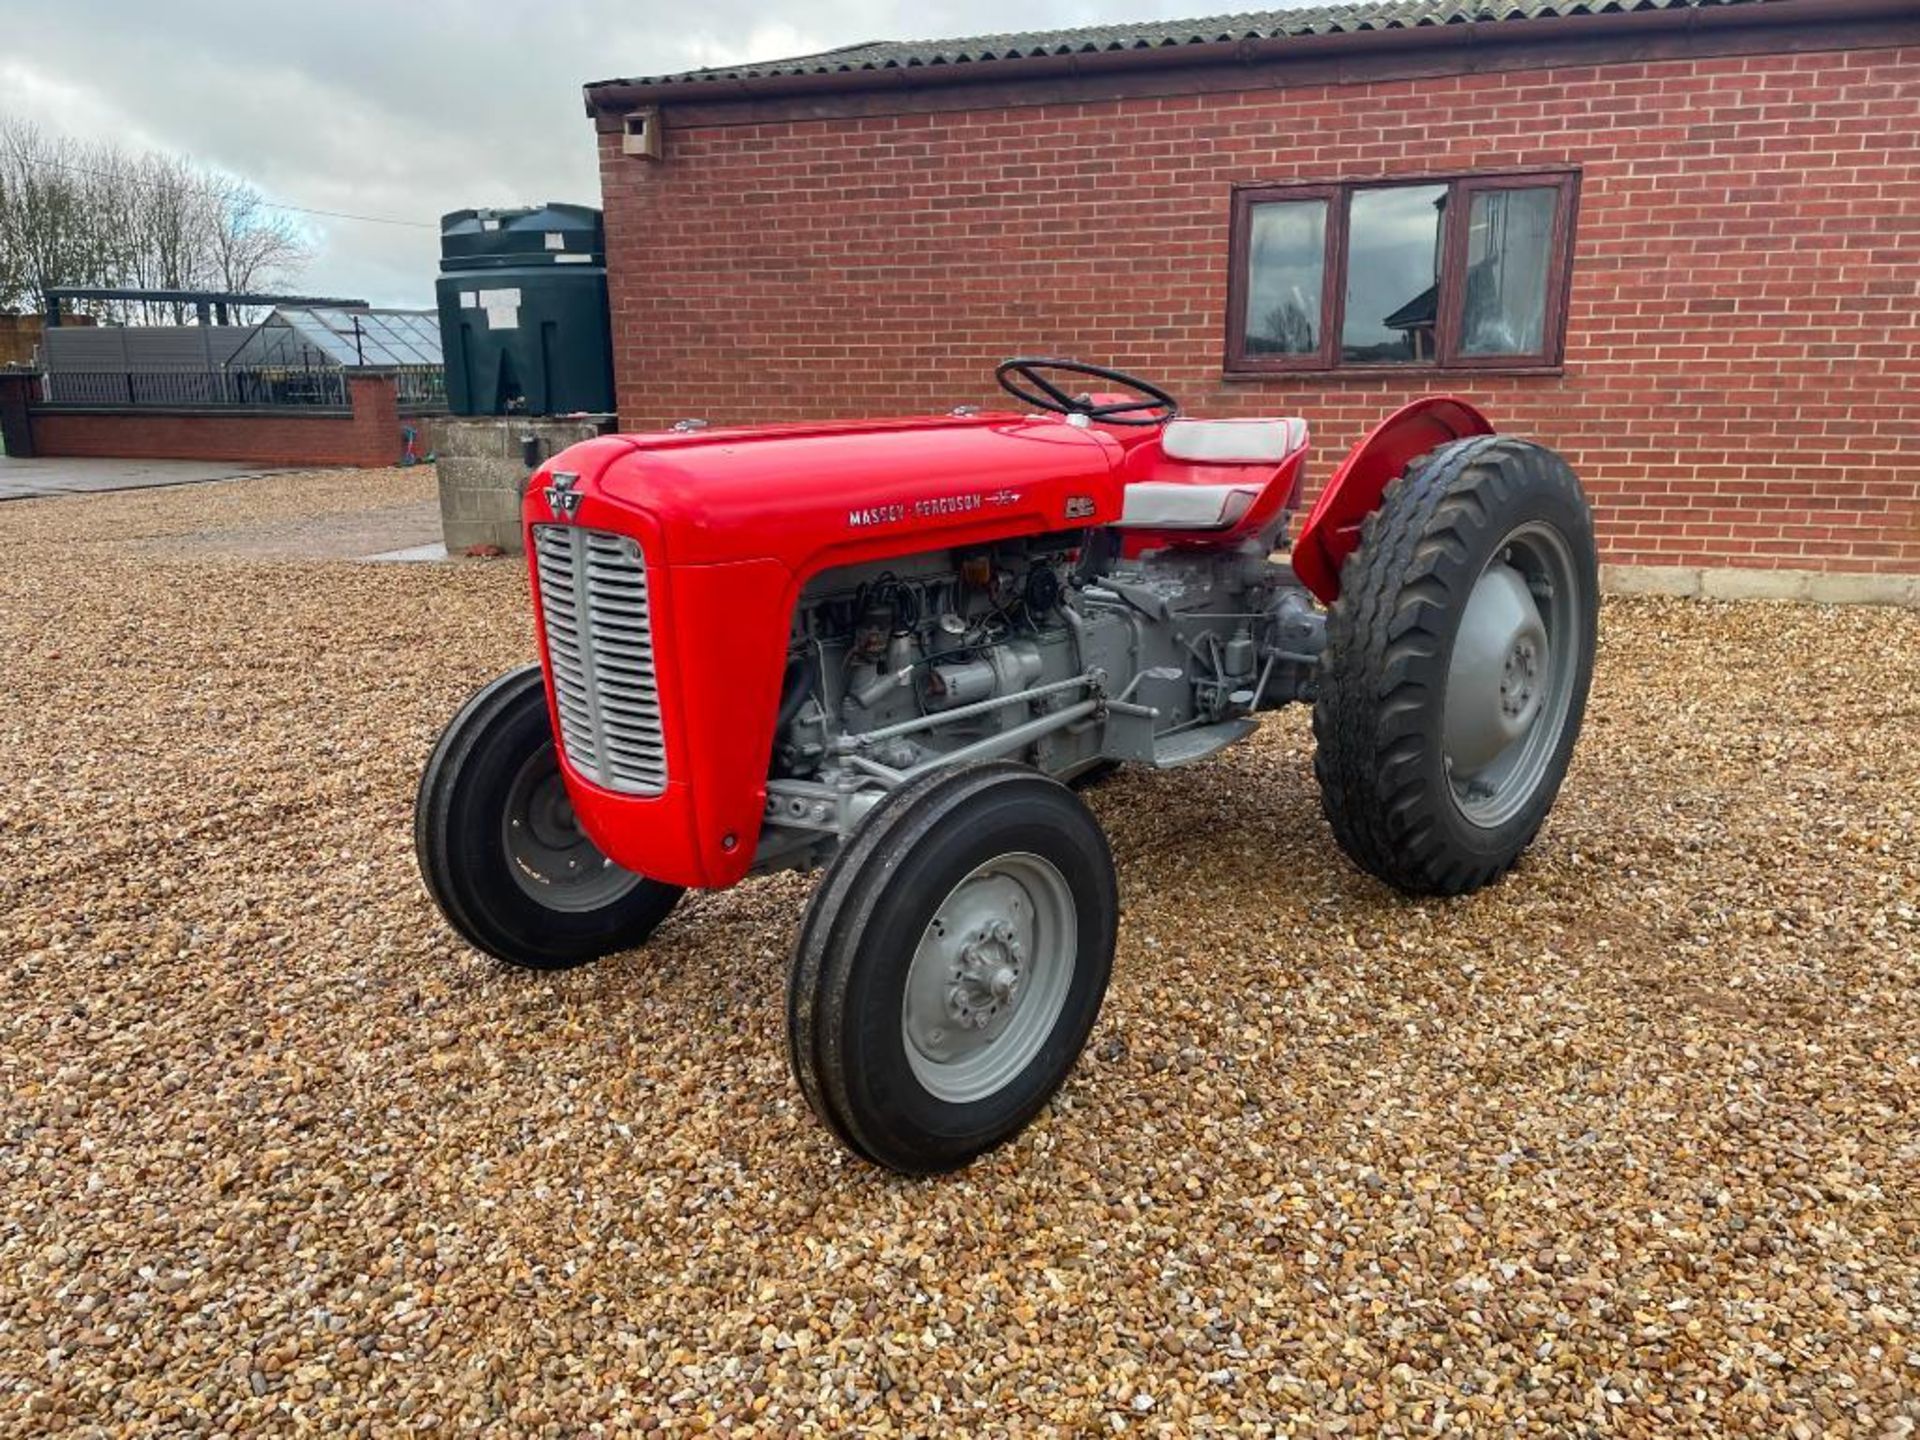 1962 Massey Ferguson 35 Industrial petrol 2wd tractor on 6.00-16 front and 10.00-28IND rear wheels a - Image 2 of 19